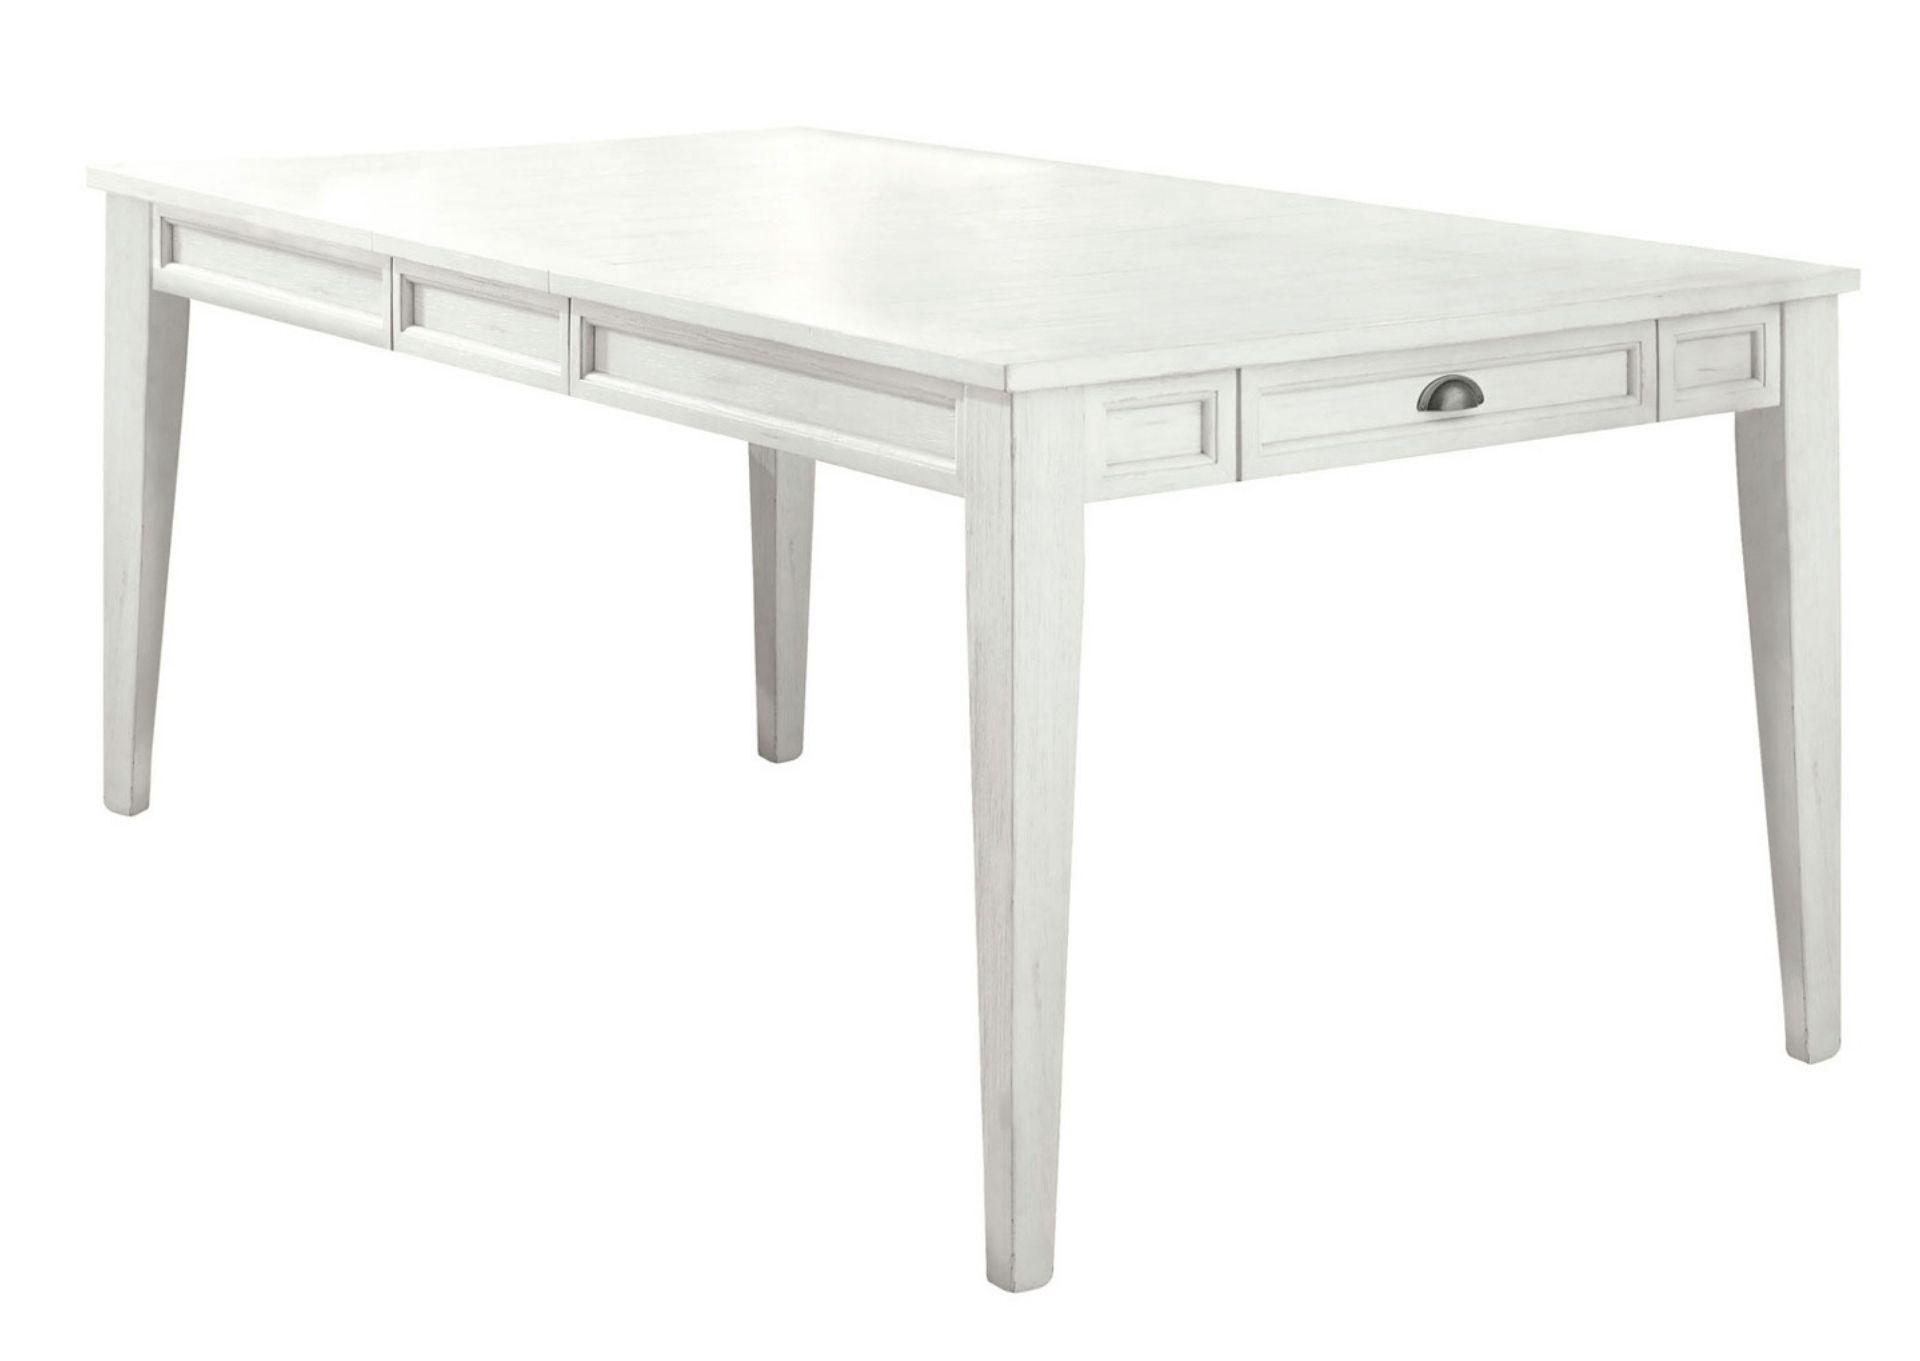 CAYLA ANTIQUE WHITE DINING TABLE,STEVE SILVER COMPANY